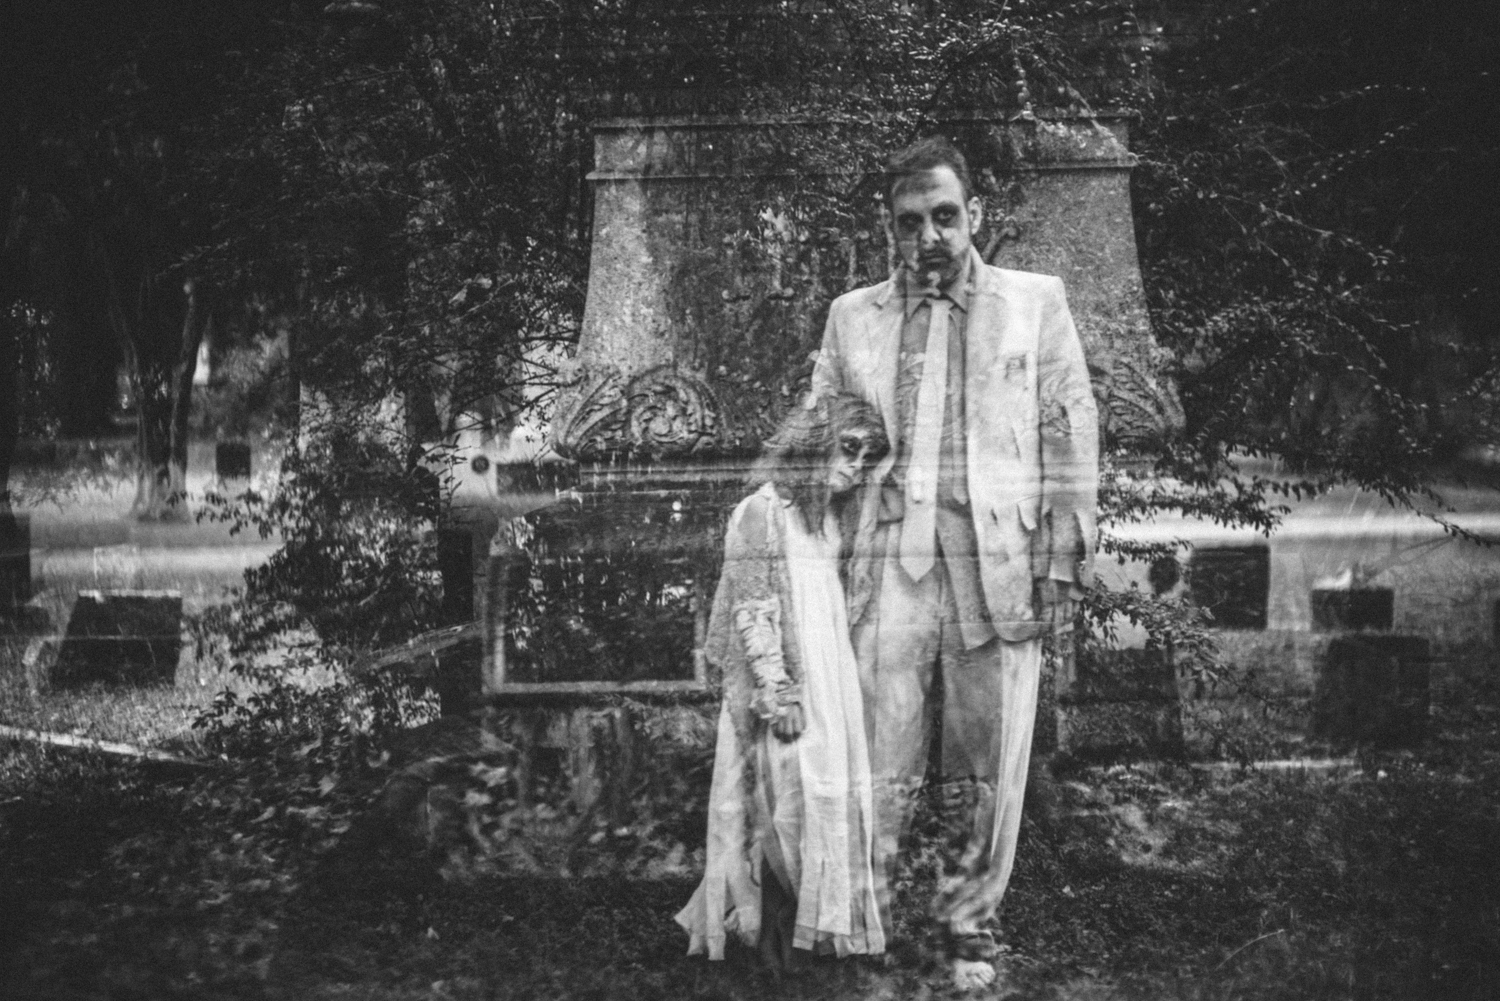 PHOTO: The Peveto family, of Dallas, holds annual eerie Halloween daddy-daughter photo shoots.